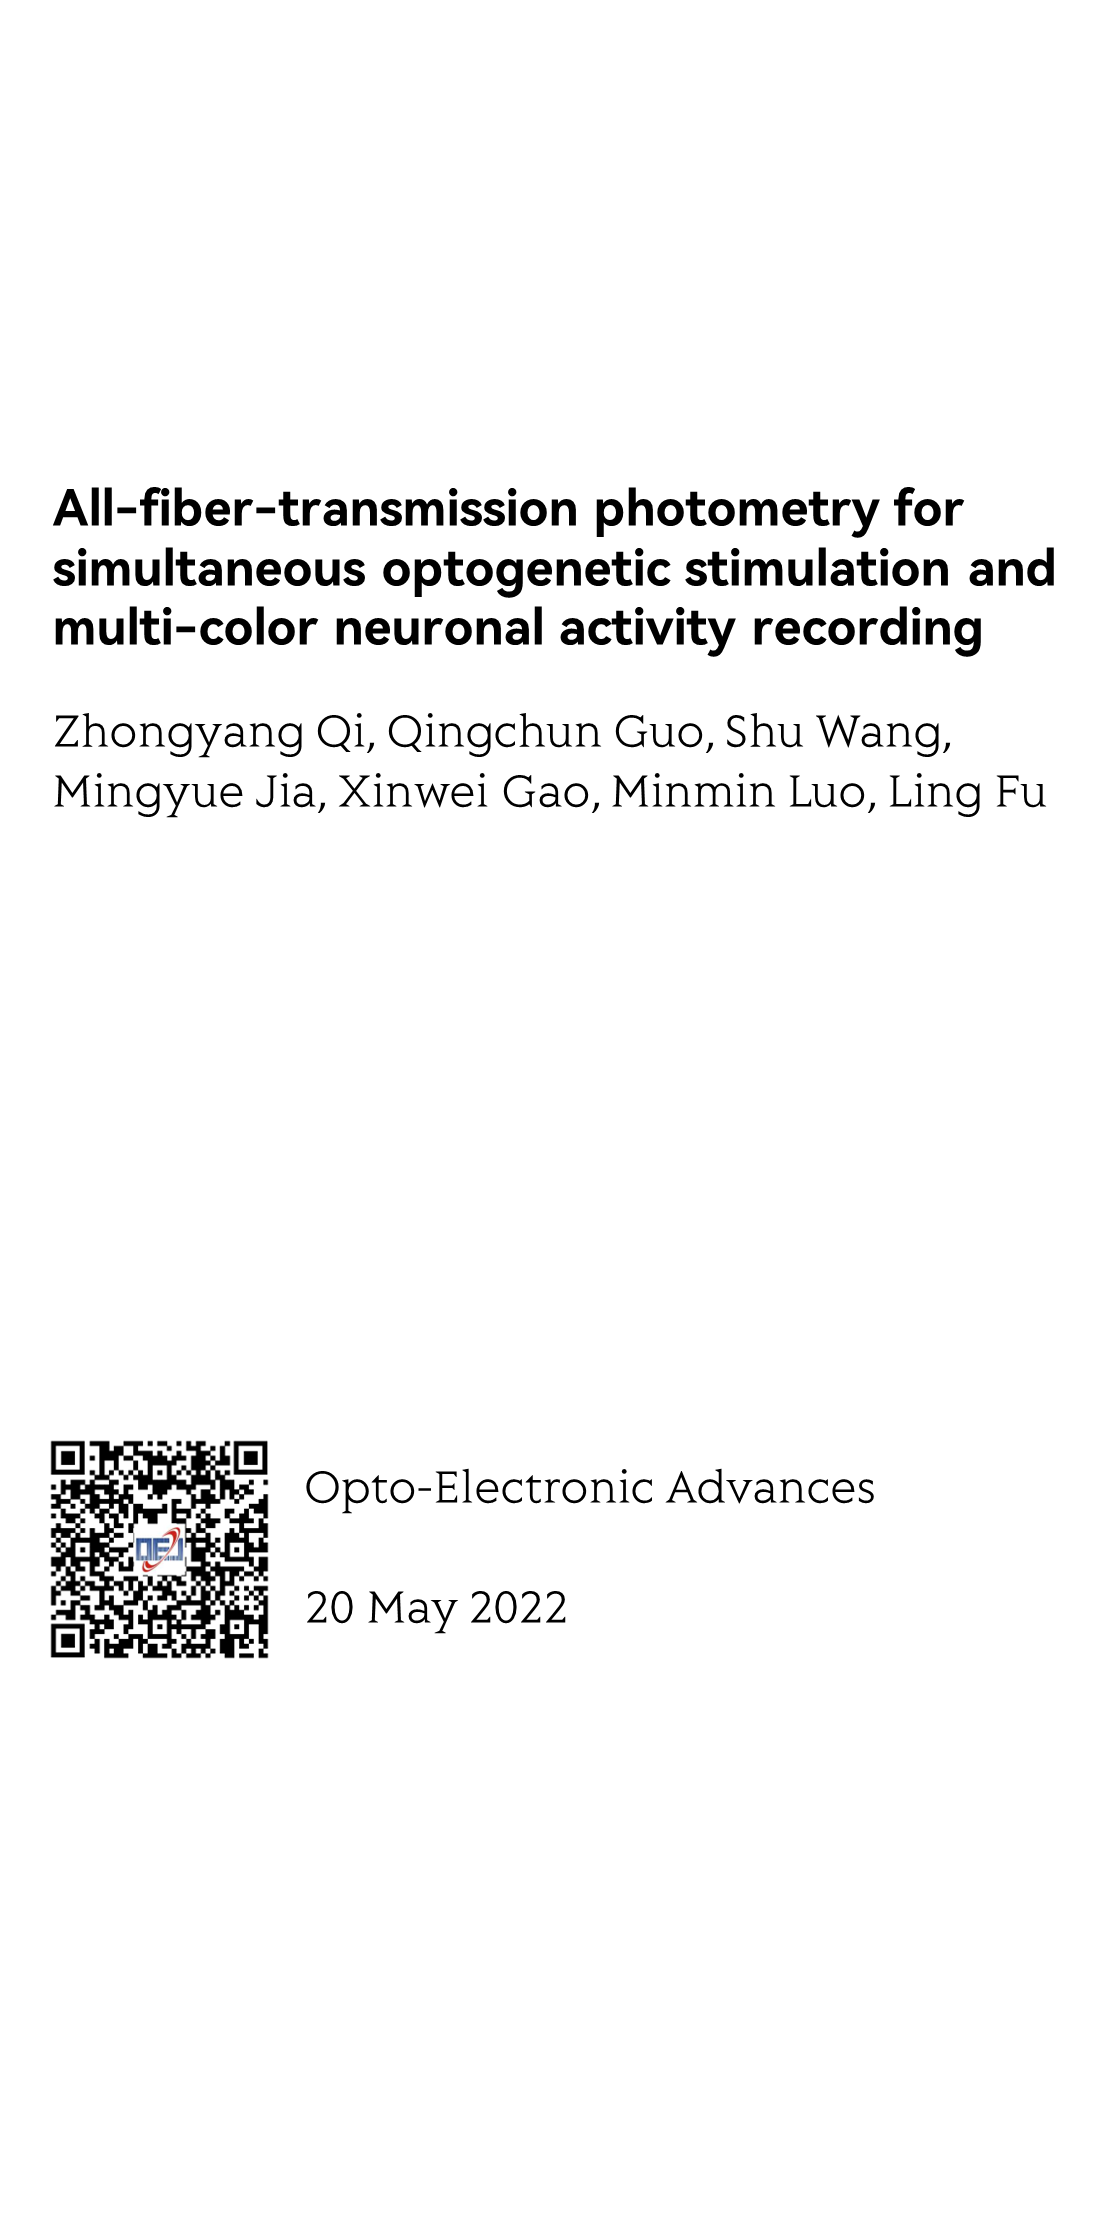 All-fiber-transmission photometry for simultaneous optogenetic stimulation and multi-color neuronal activity recording_1